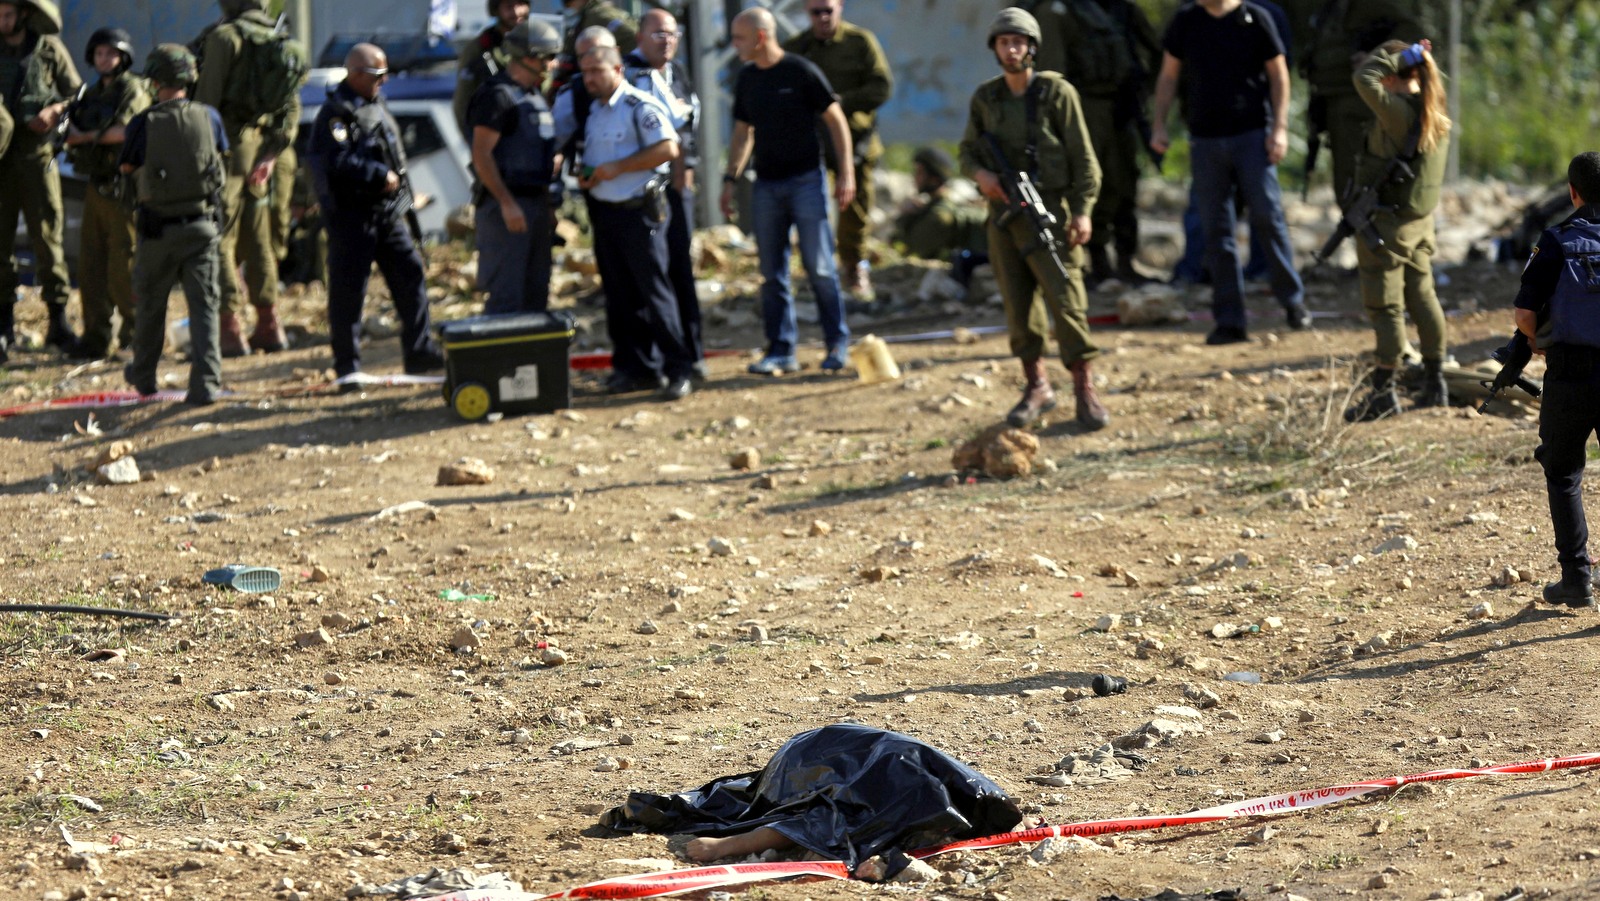 Israeli soldiers stand near the body of 27-year-old Palestinian Fadi Froukh, in the Beit Einun junction east of the West Bank city of Hebron, Sunday, Nov 1, 2015. The Israeli military claims the man had a knife and tried to stab them on Sunday in the West Bank city of Hebron but admit that no Israelis were harmed. (AP Photo/Nasser Shiyoukhi)